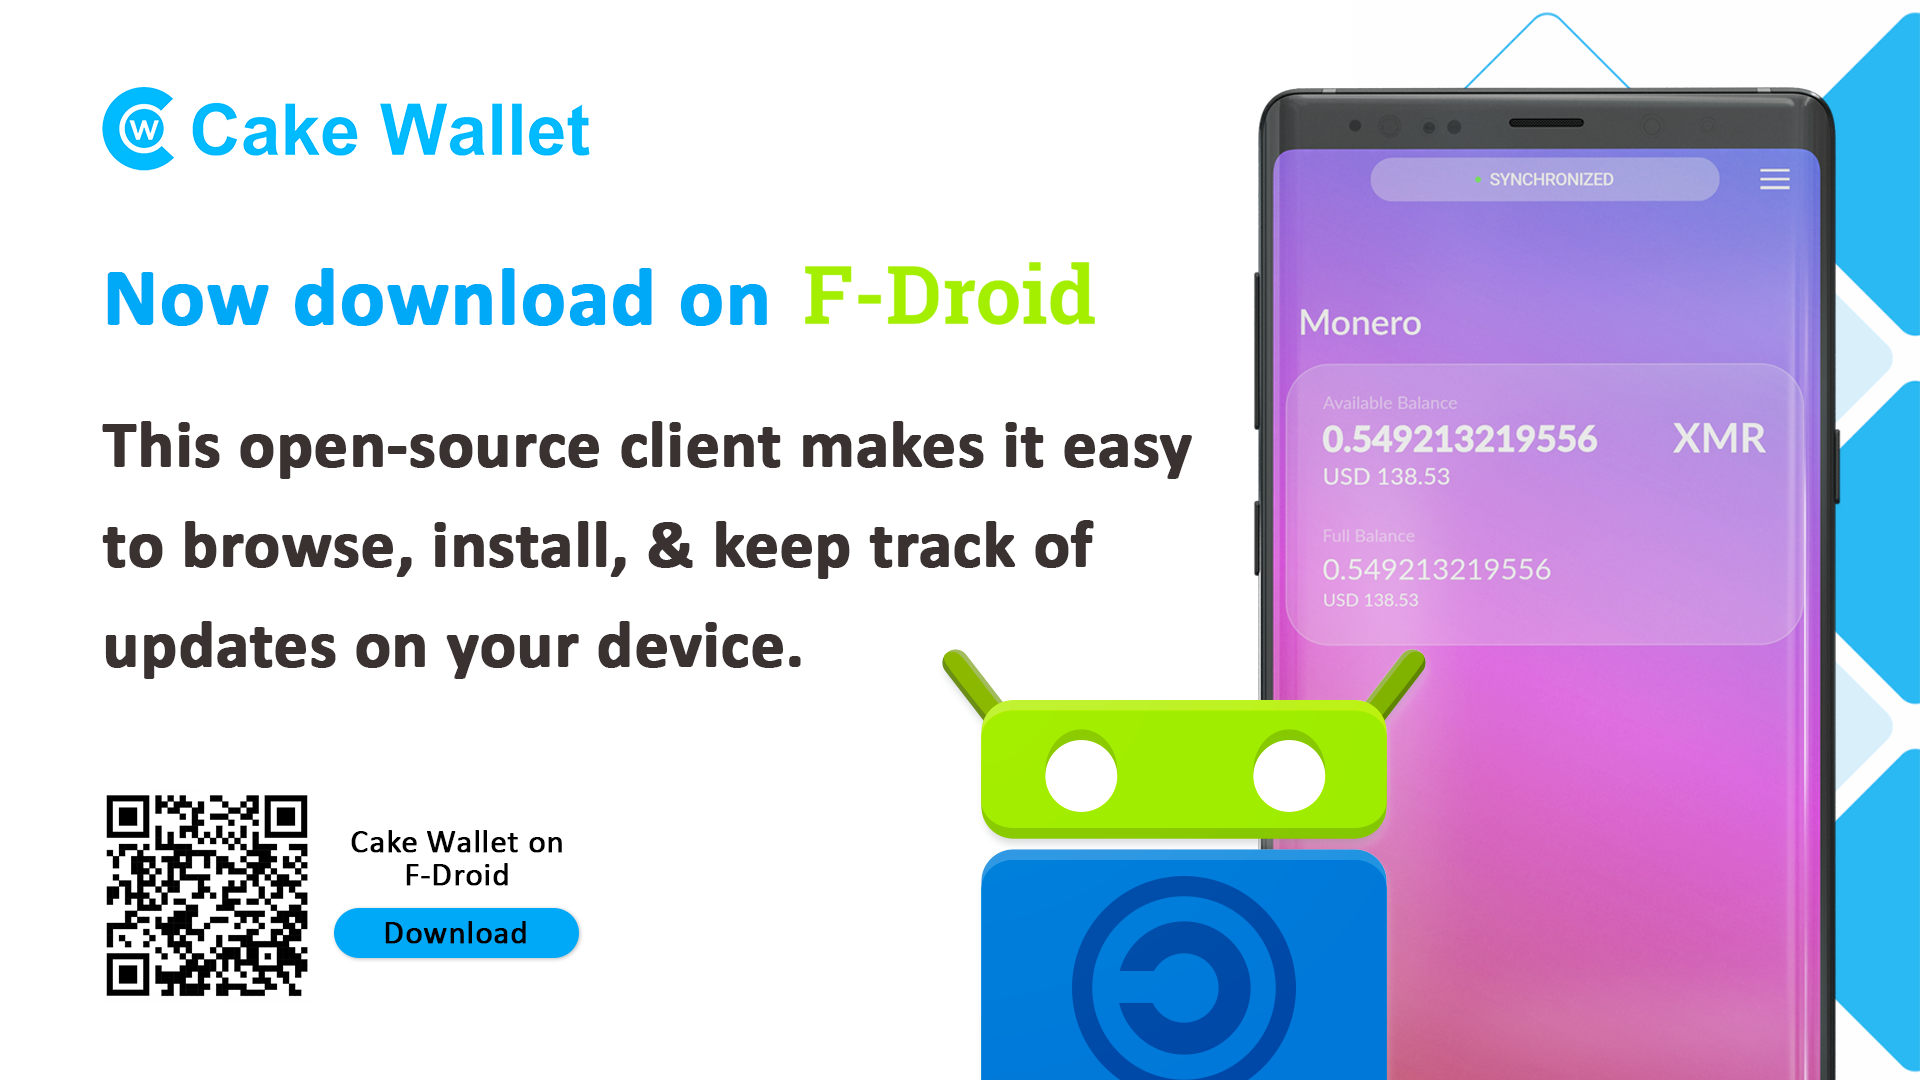 Cake Wallet and Monero.com on F-Droid